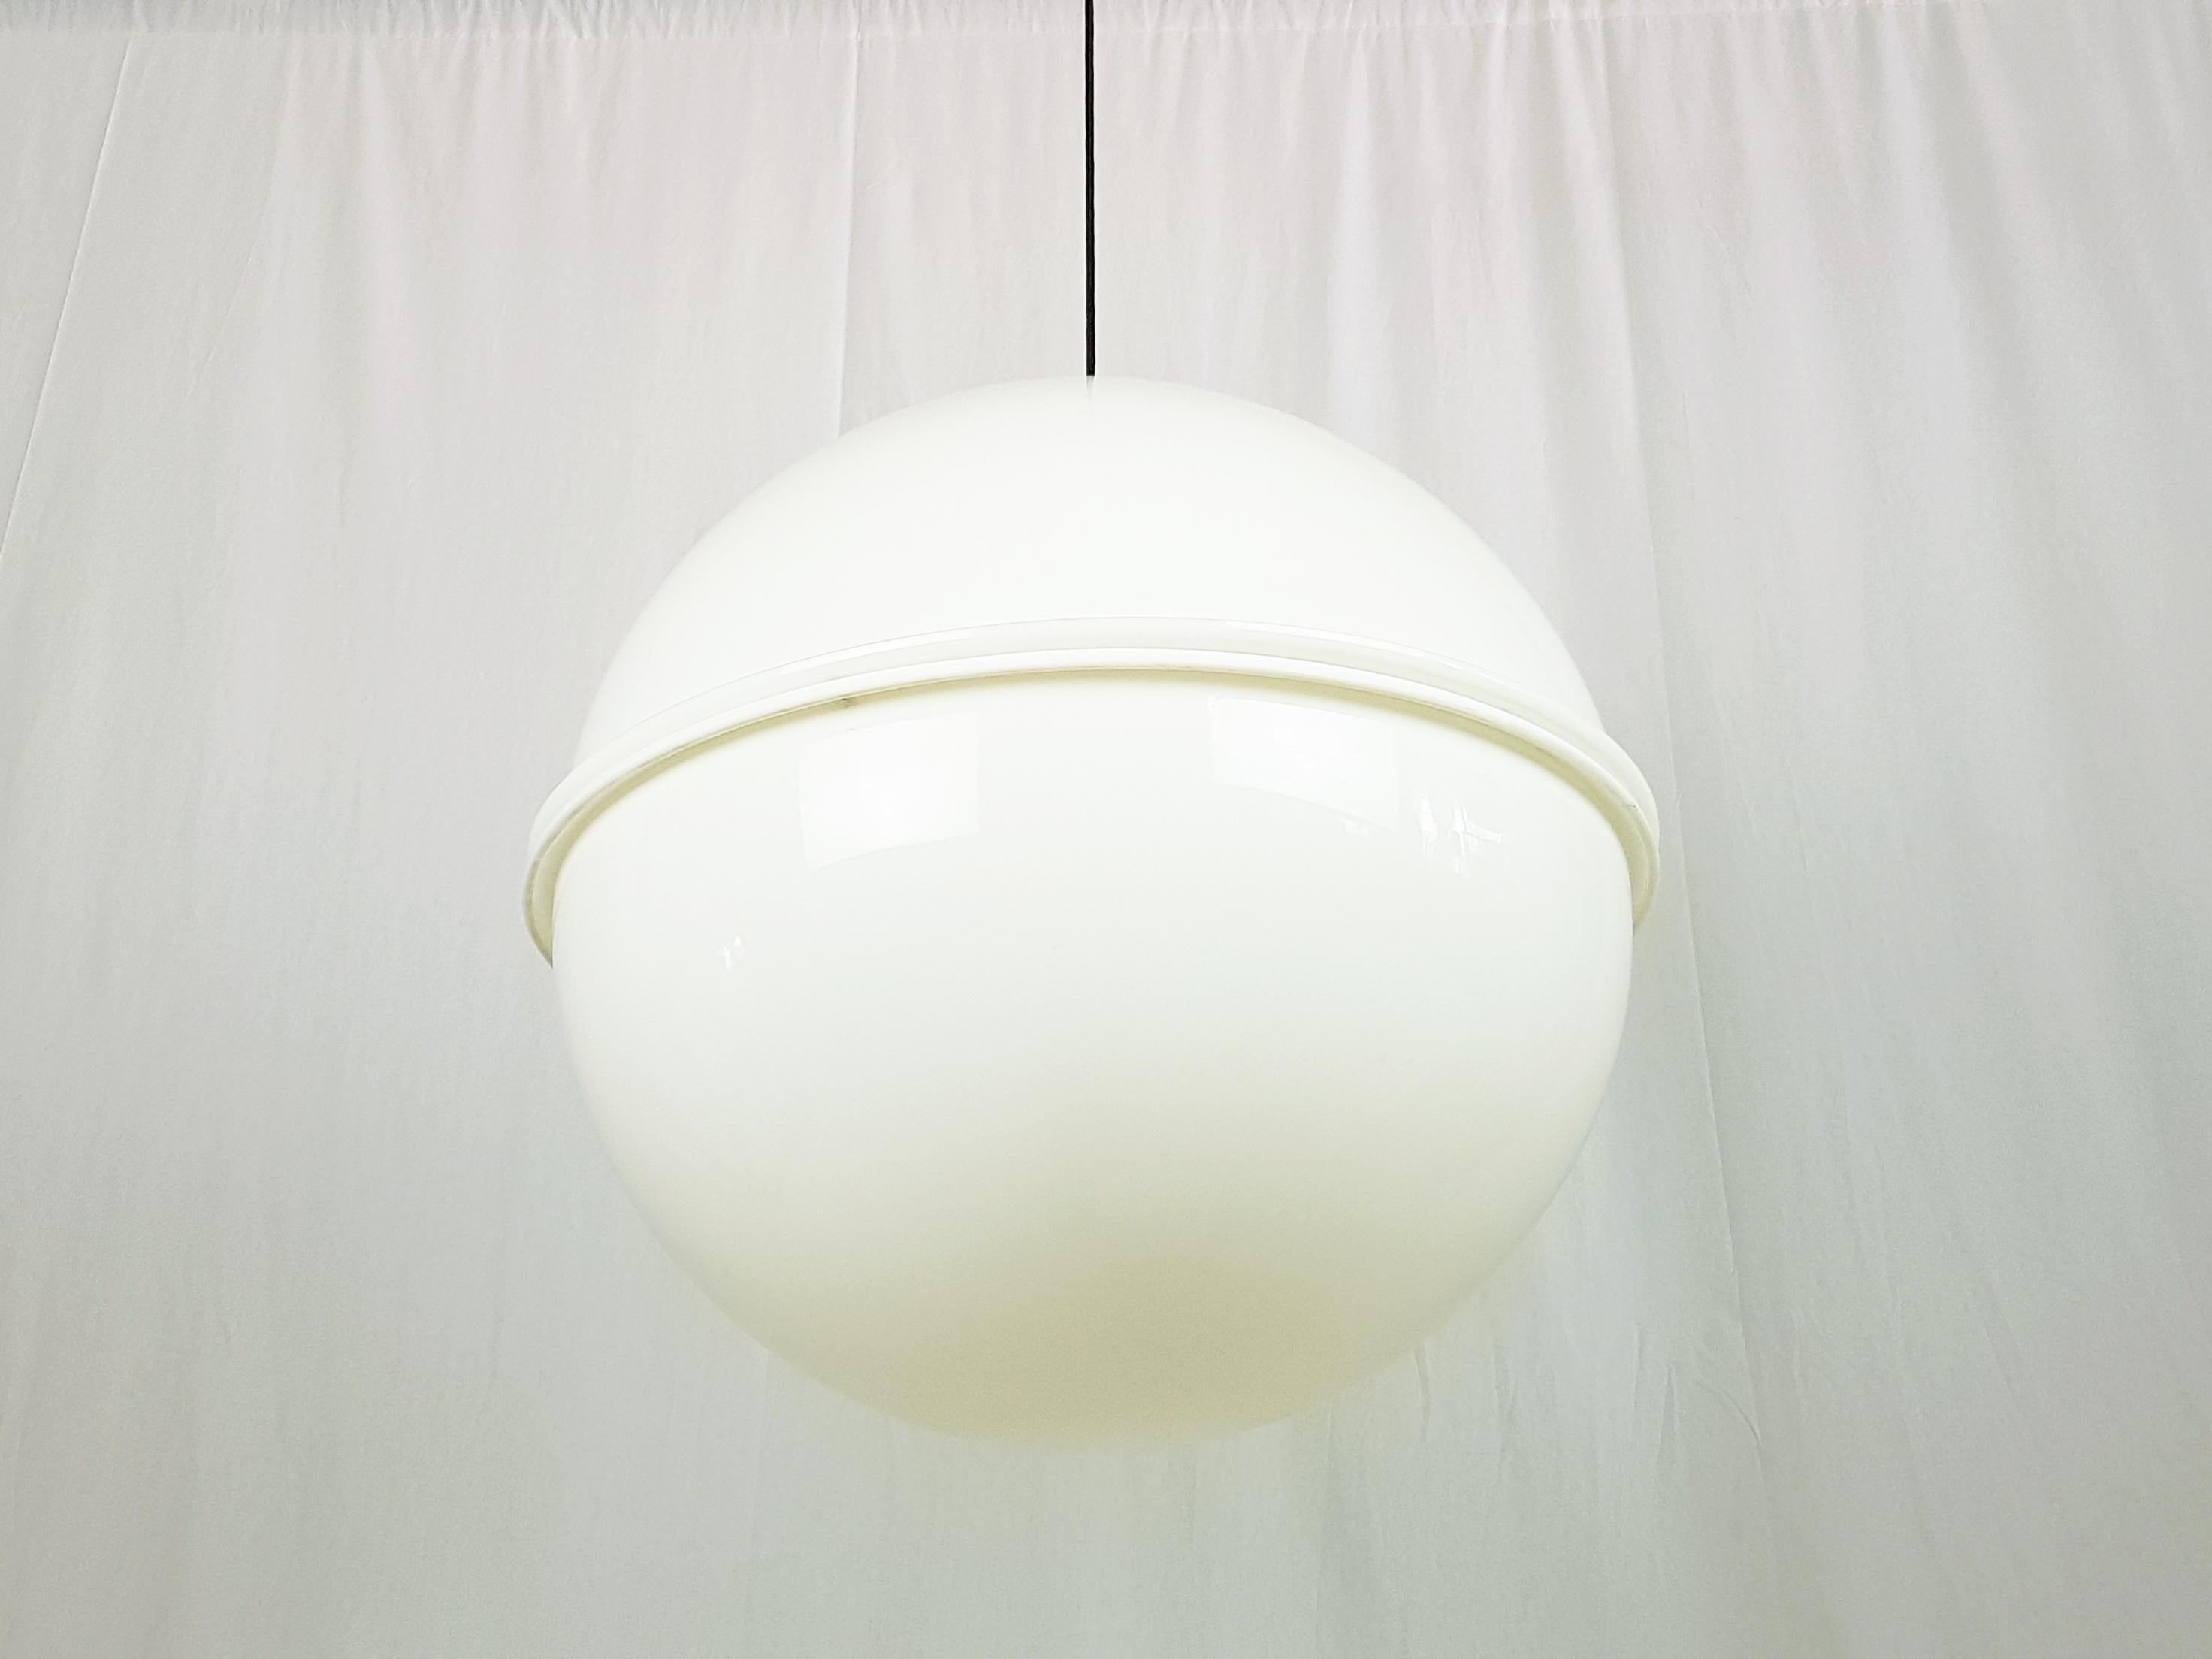 This large pendant is composed by 2 hemispherical shade in white methacrylate, joined tougher by 3 brass screws. The lamp features 3 E27 lamp socket and remains in very good condition.